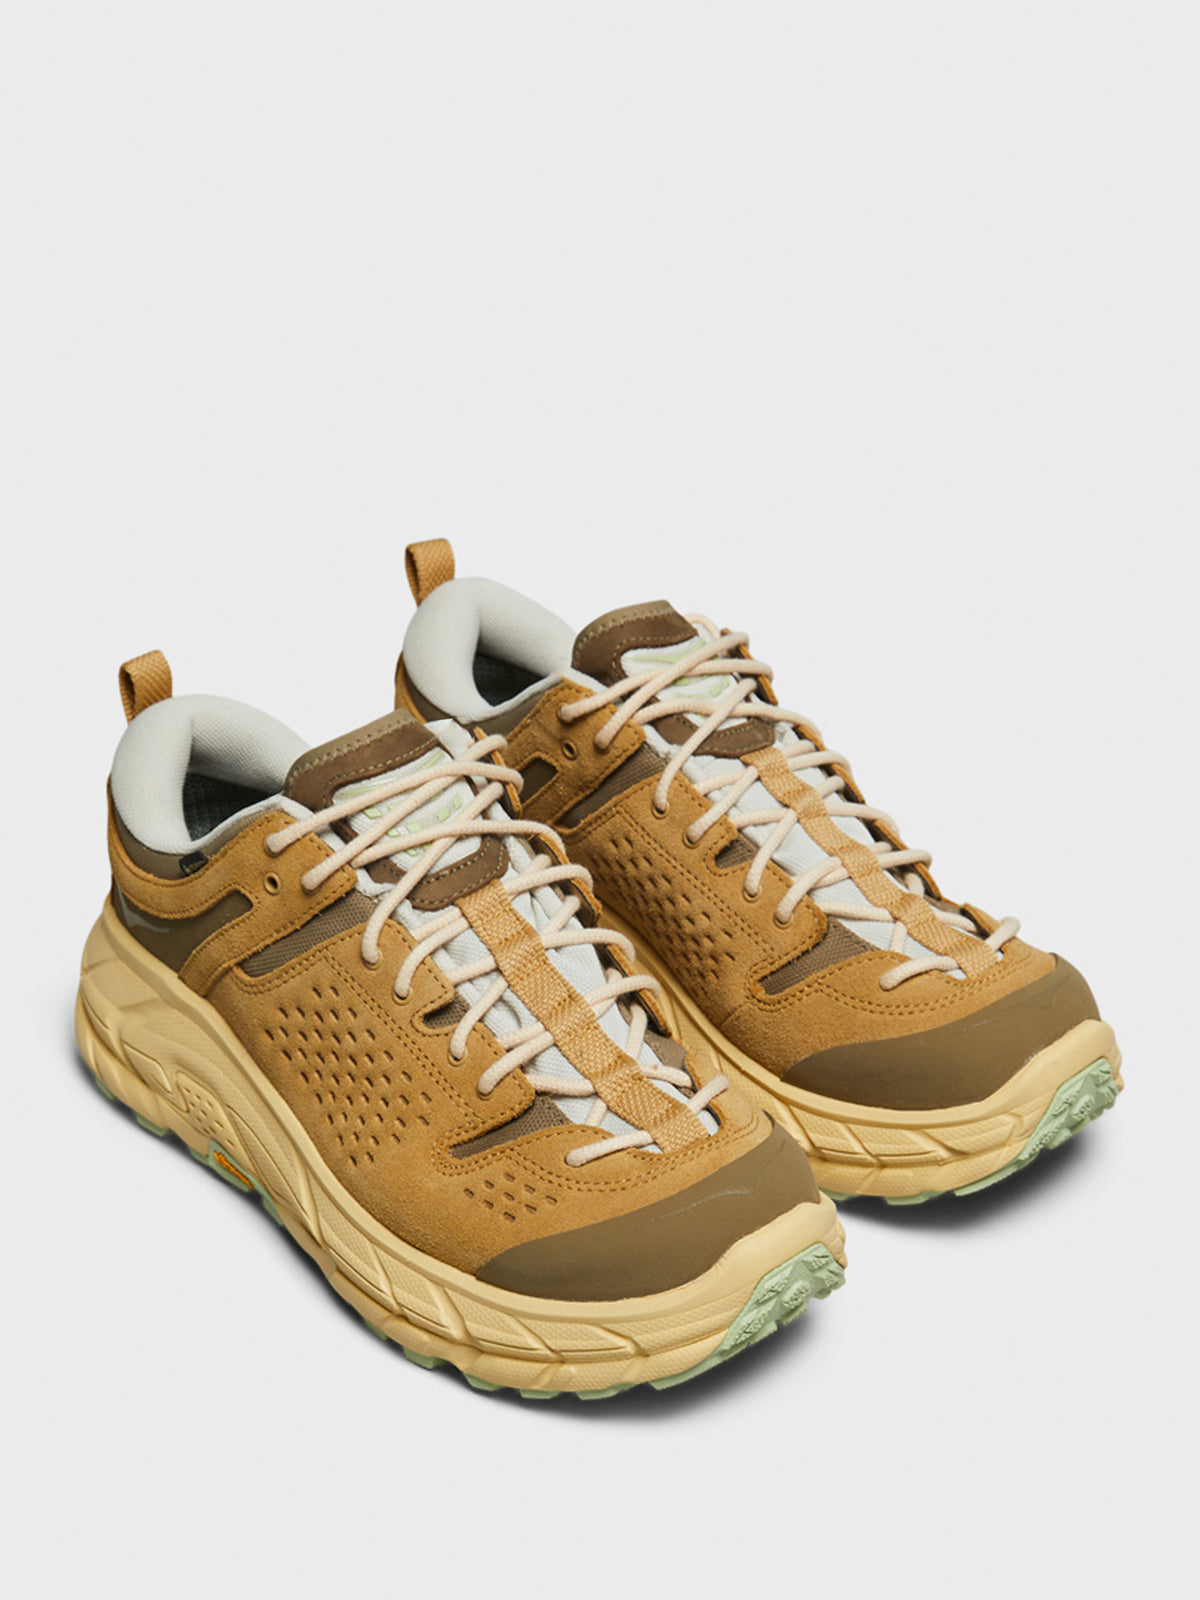 Tor Ultra Lo TP Sneakers in Brown and Beige